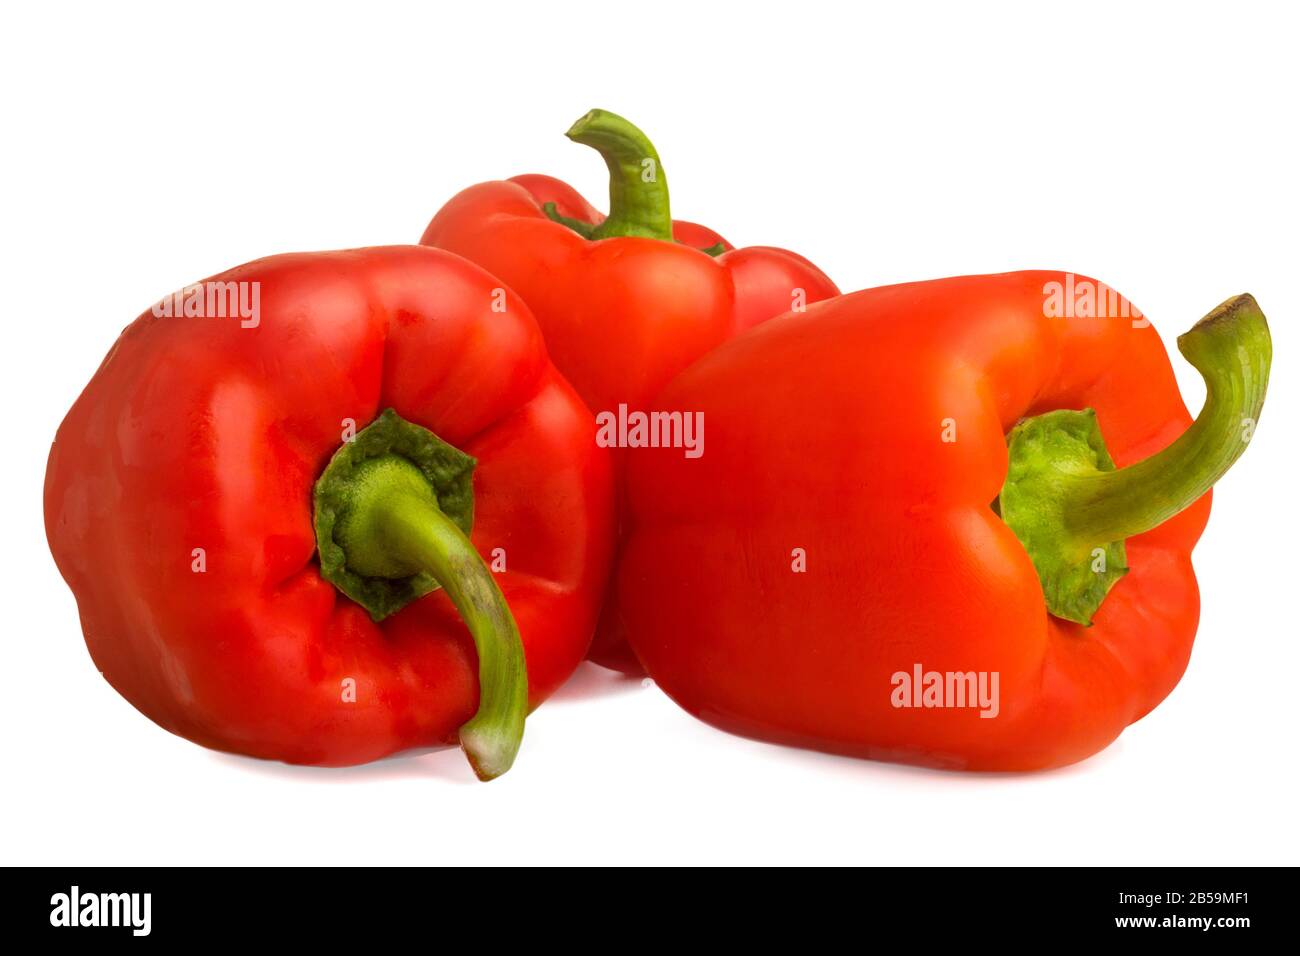 image of three red bell peppers on a white background Stock Photo